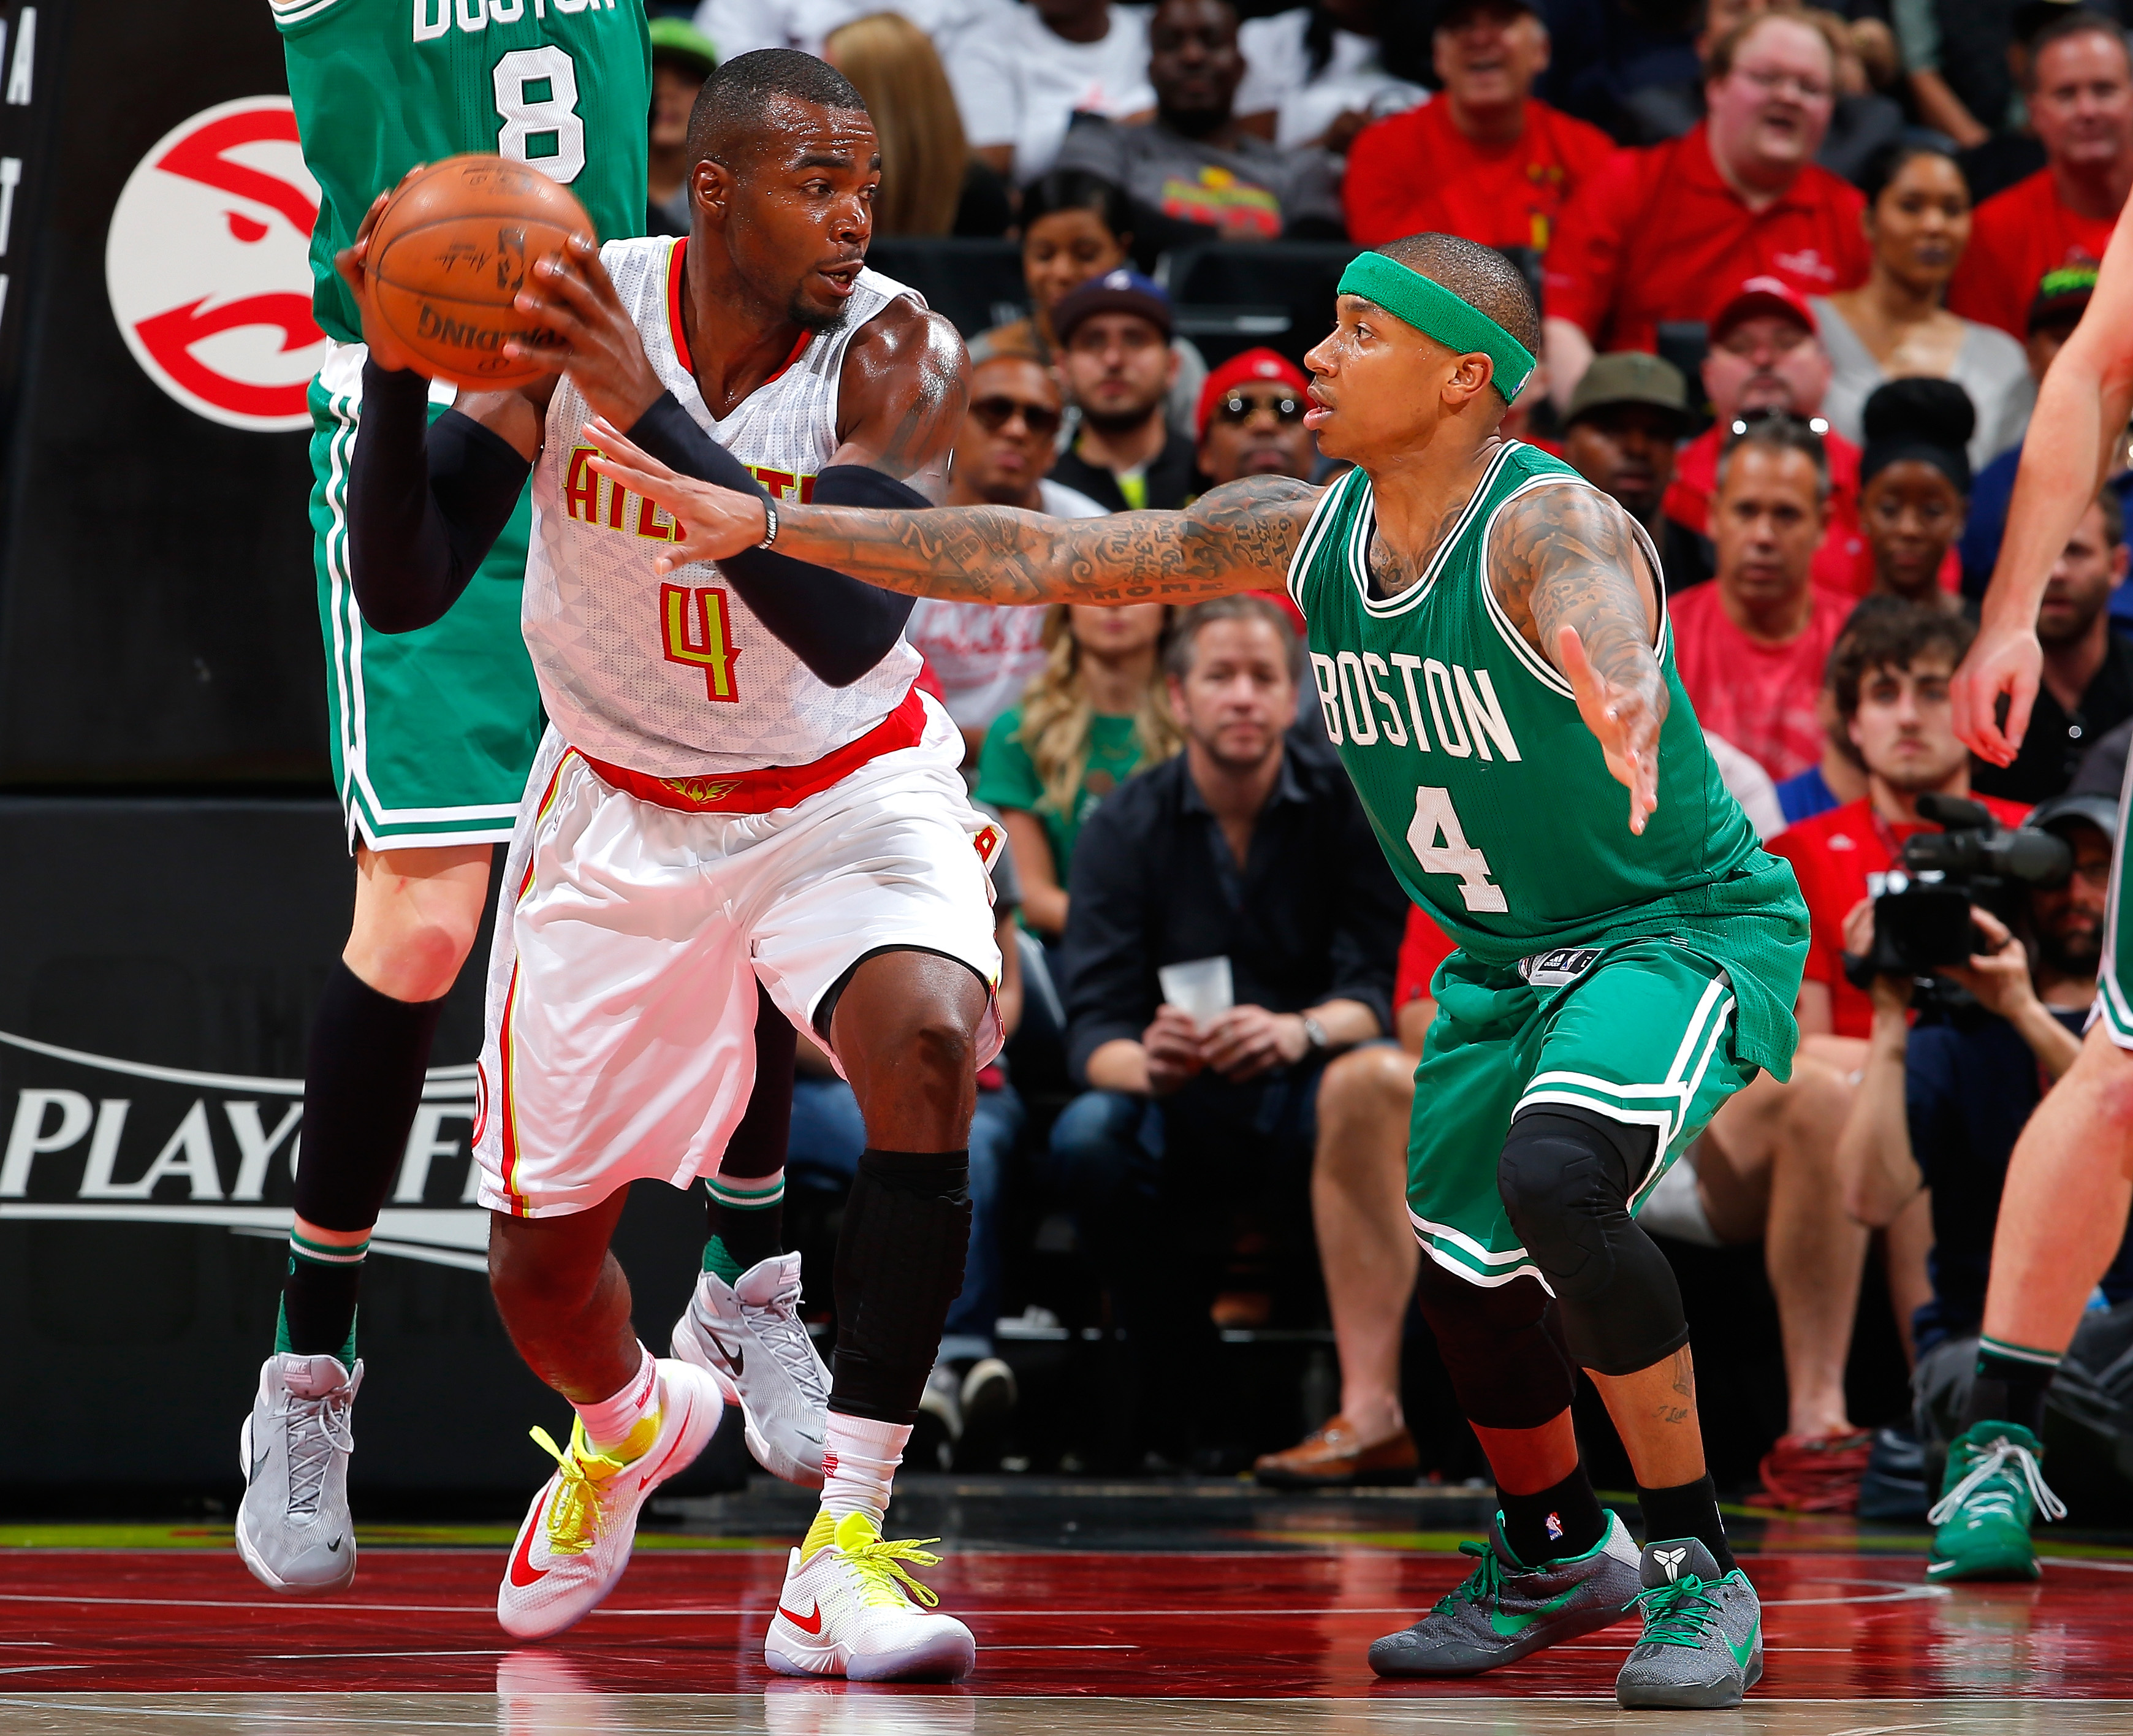 Hawks vs. Celtics Live Stream How to Watch Game 3 for Free